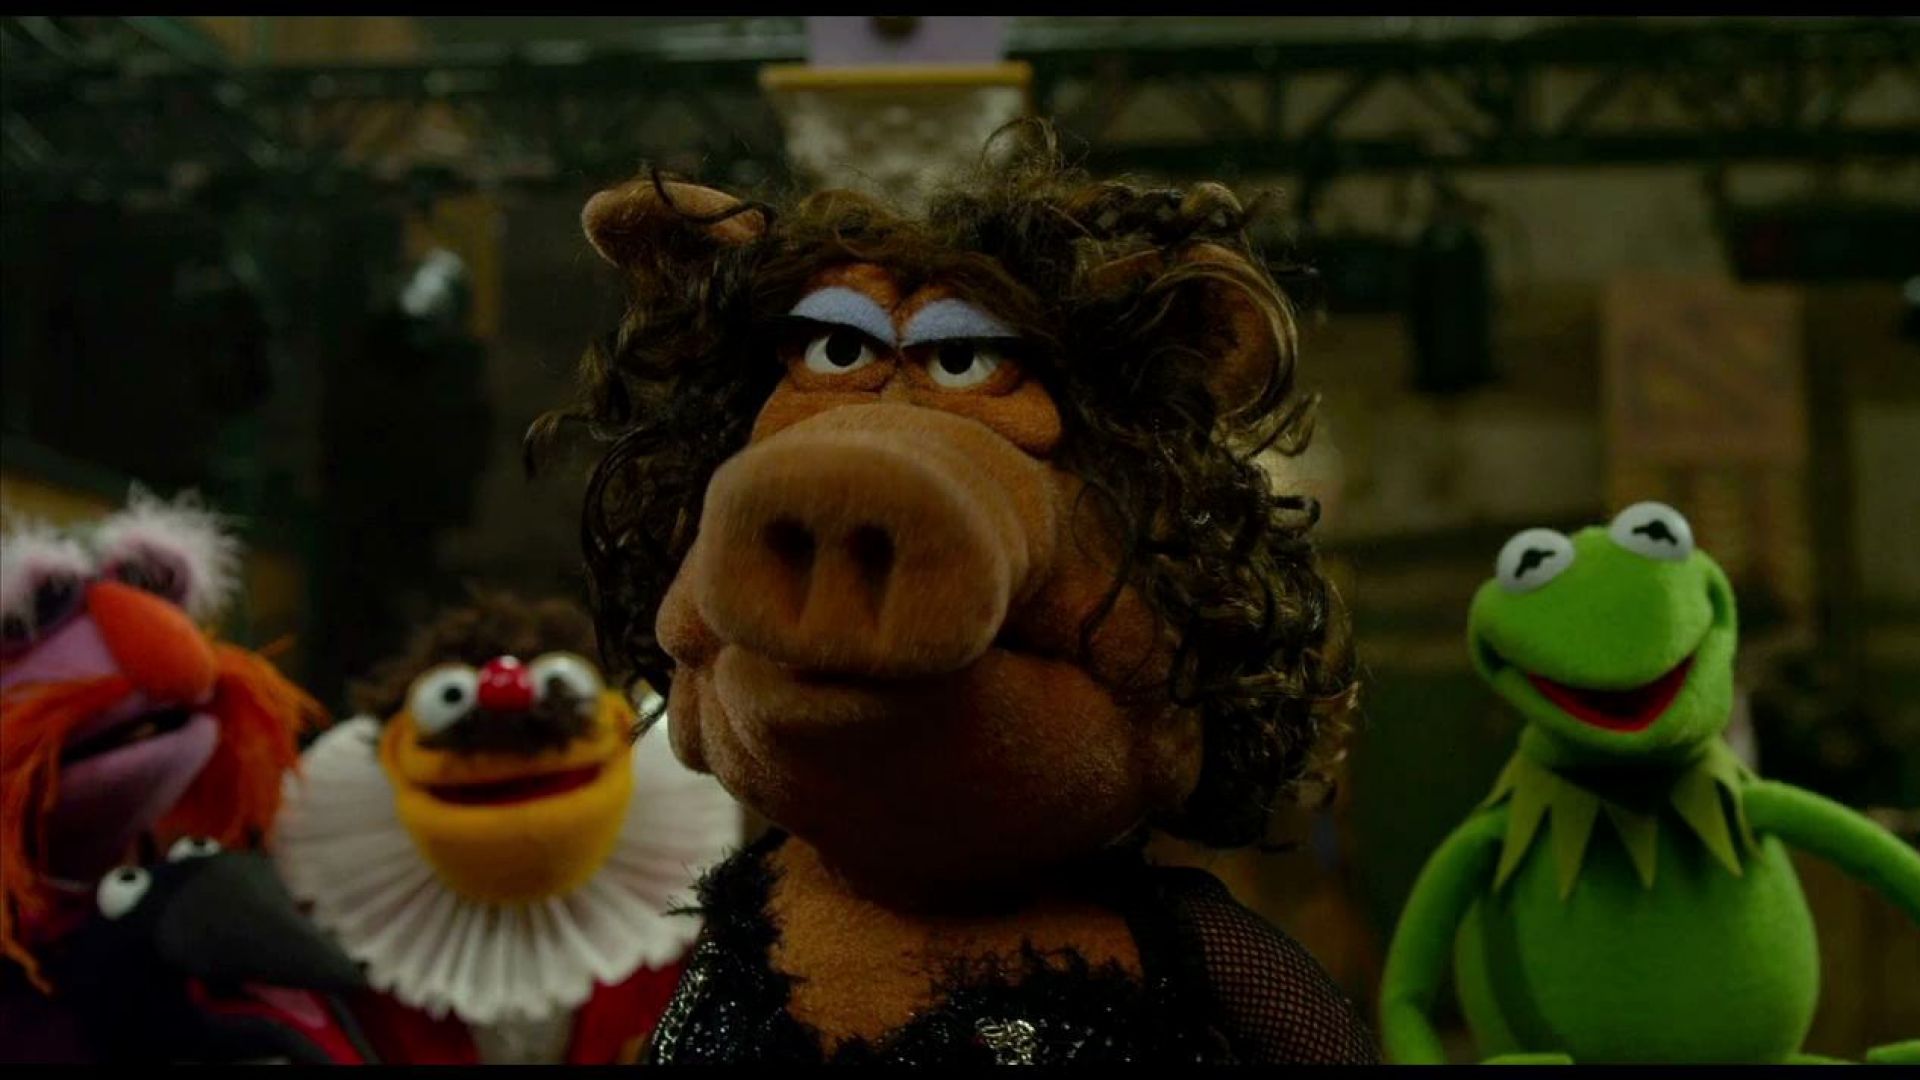 Miss Piggy has been replaced in The Muppets